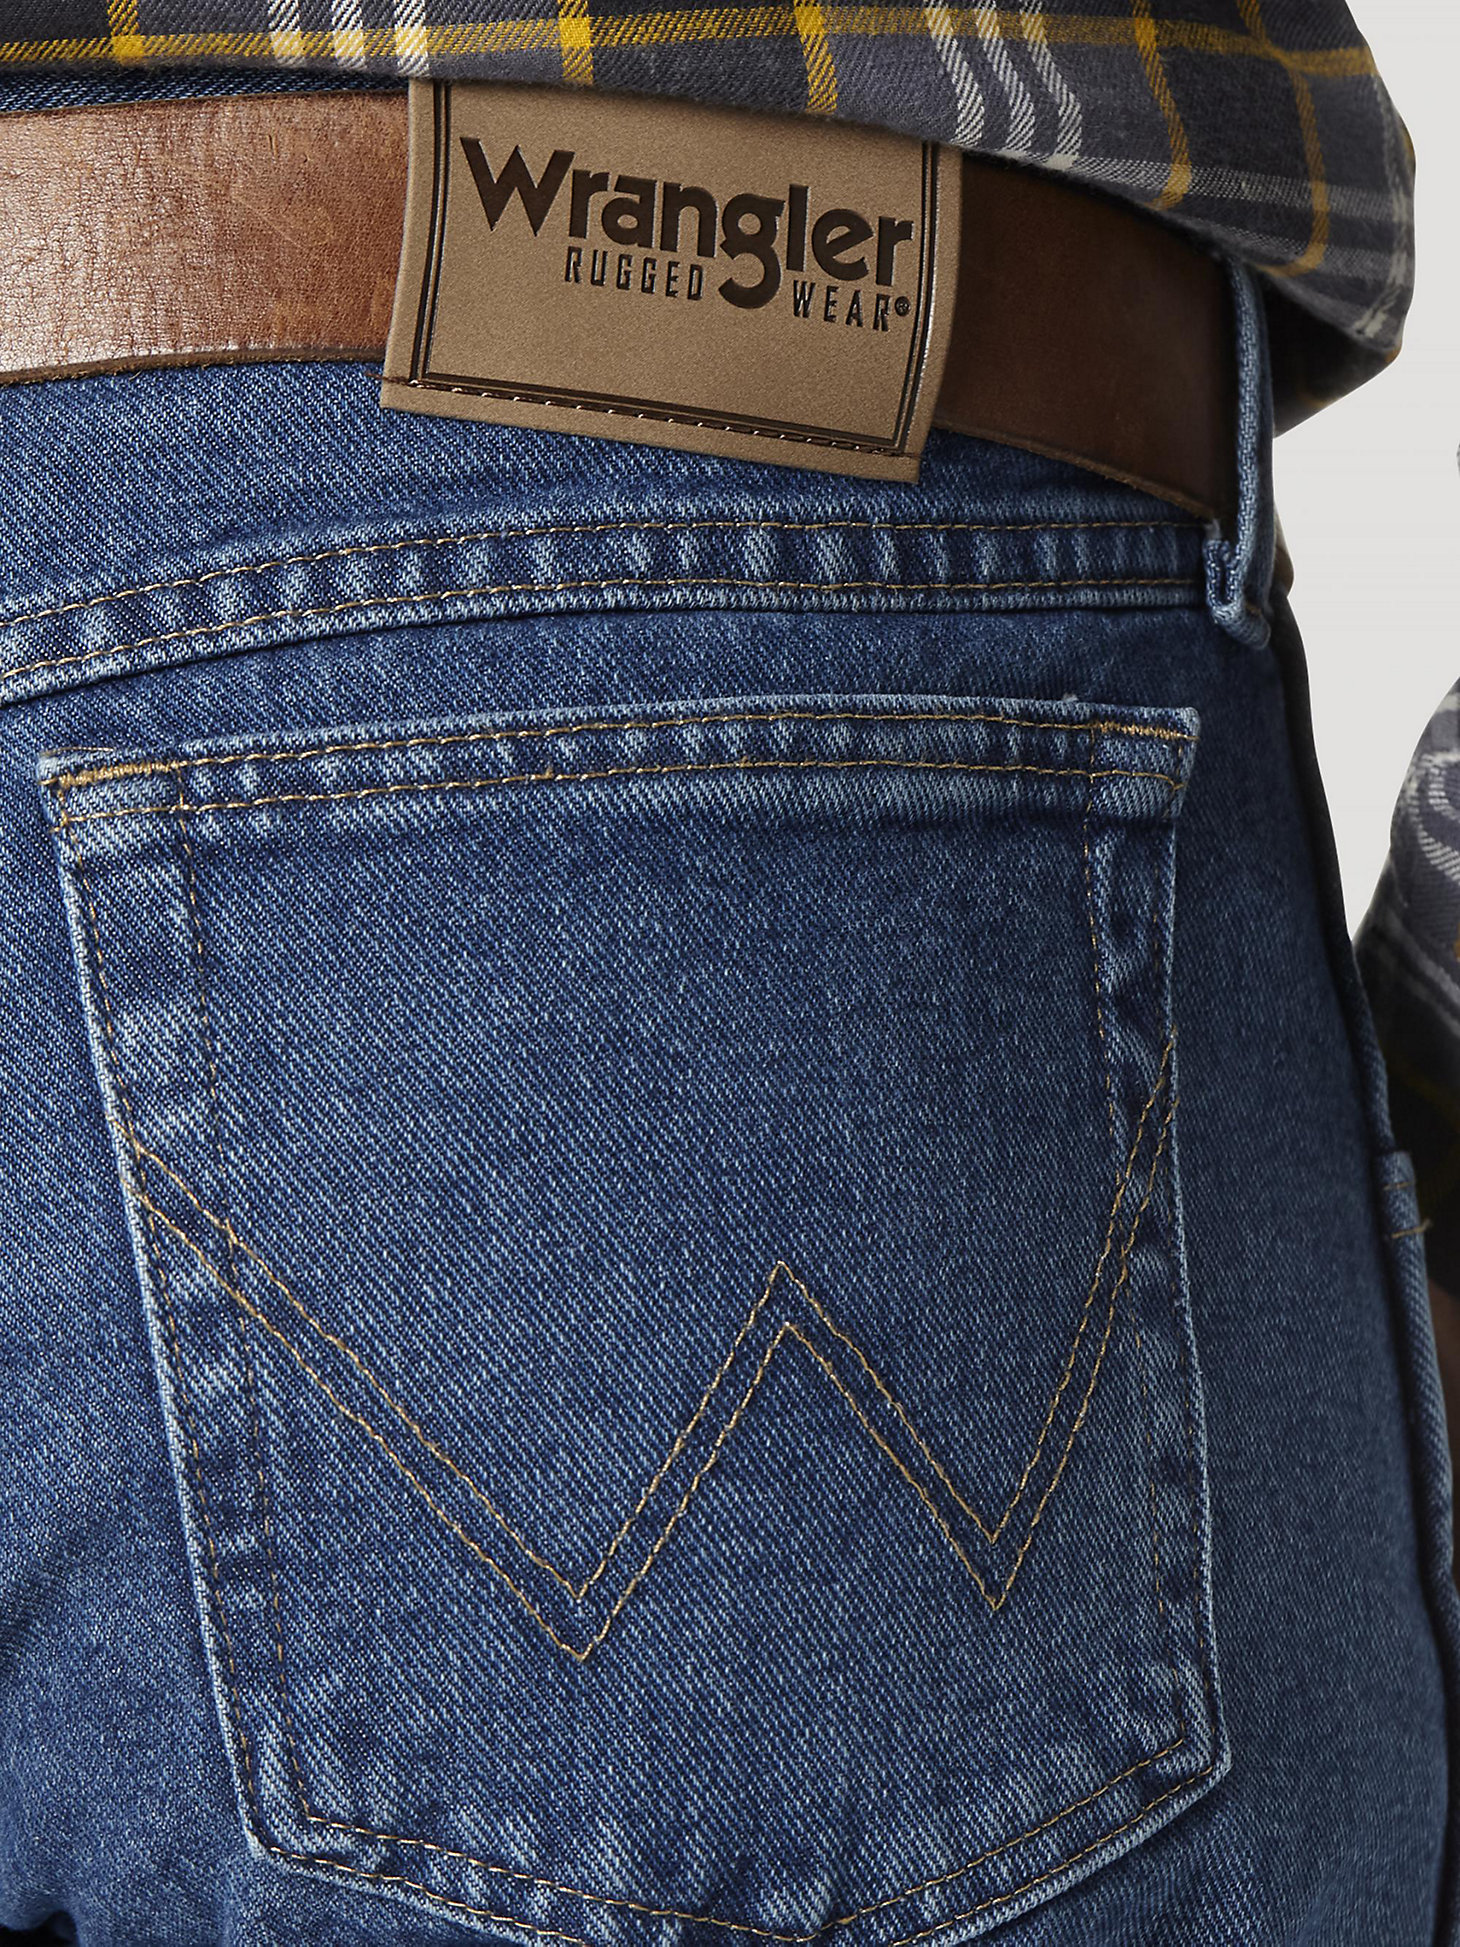 Wrangler Rugged Wear® Relaxed Fit Jean in Antique Indigo alternative view 3